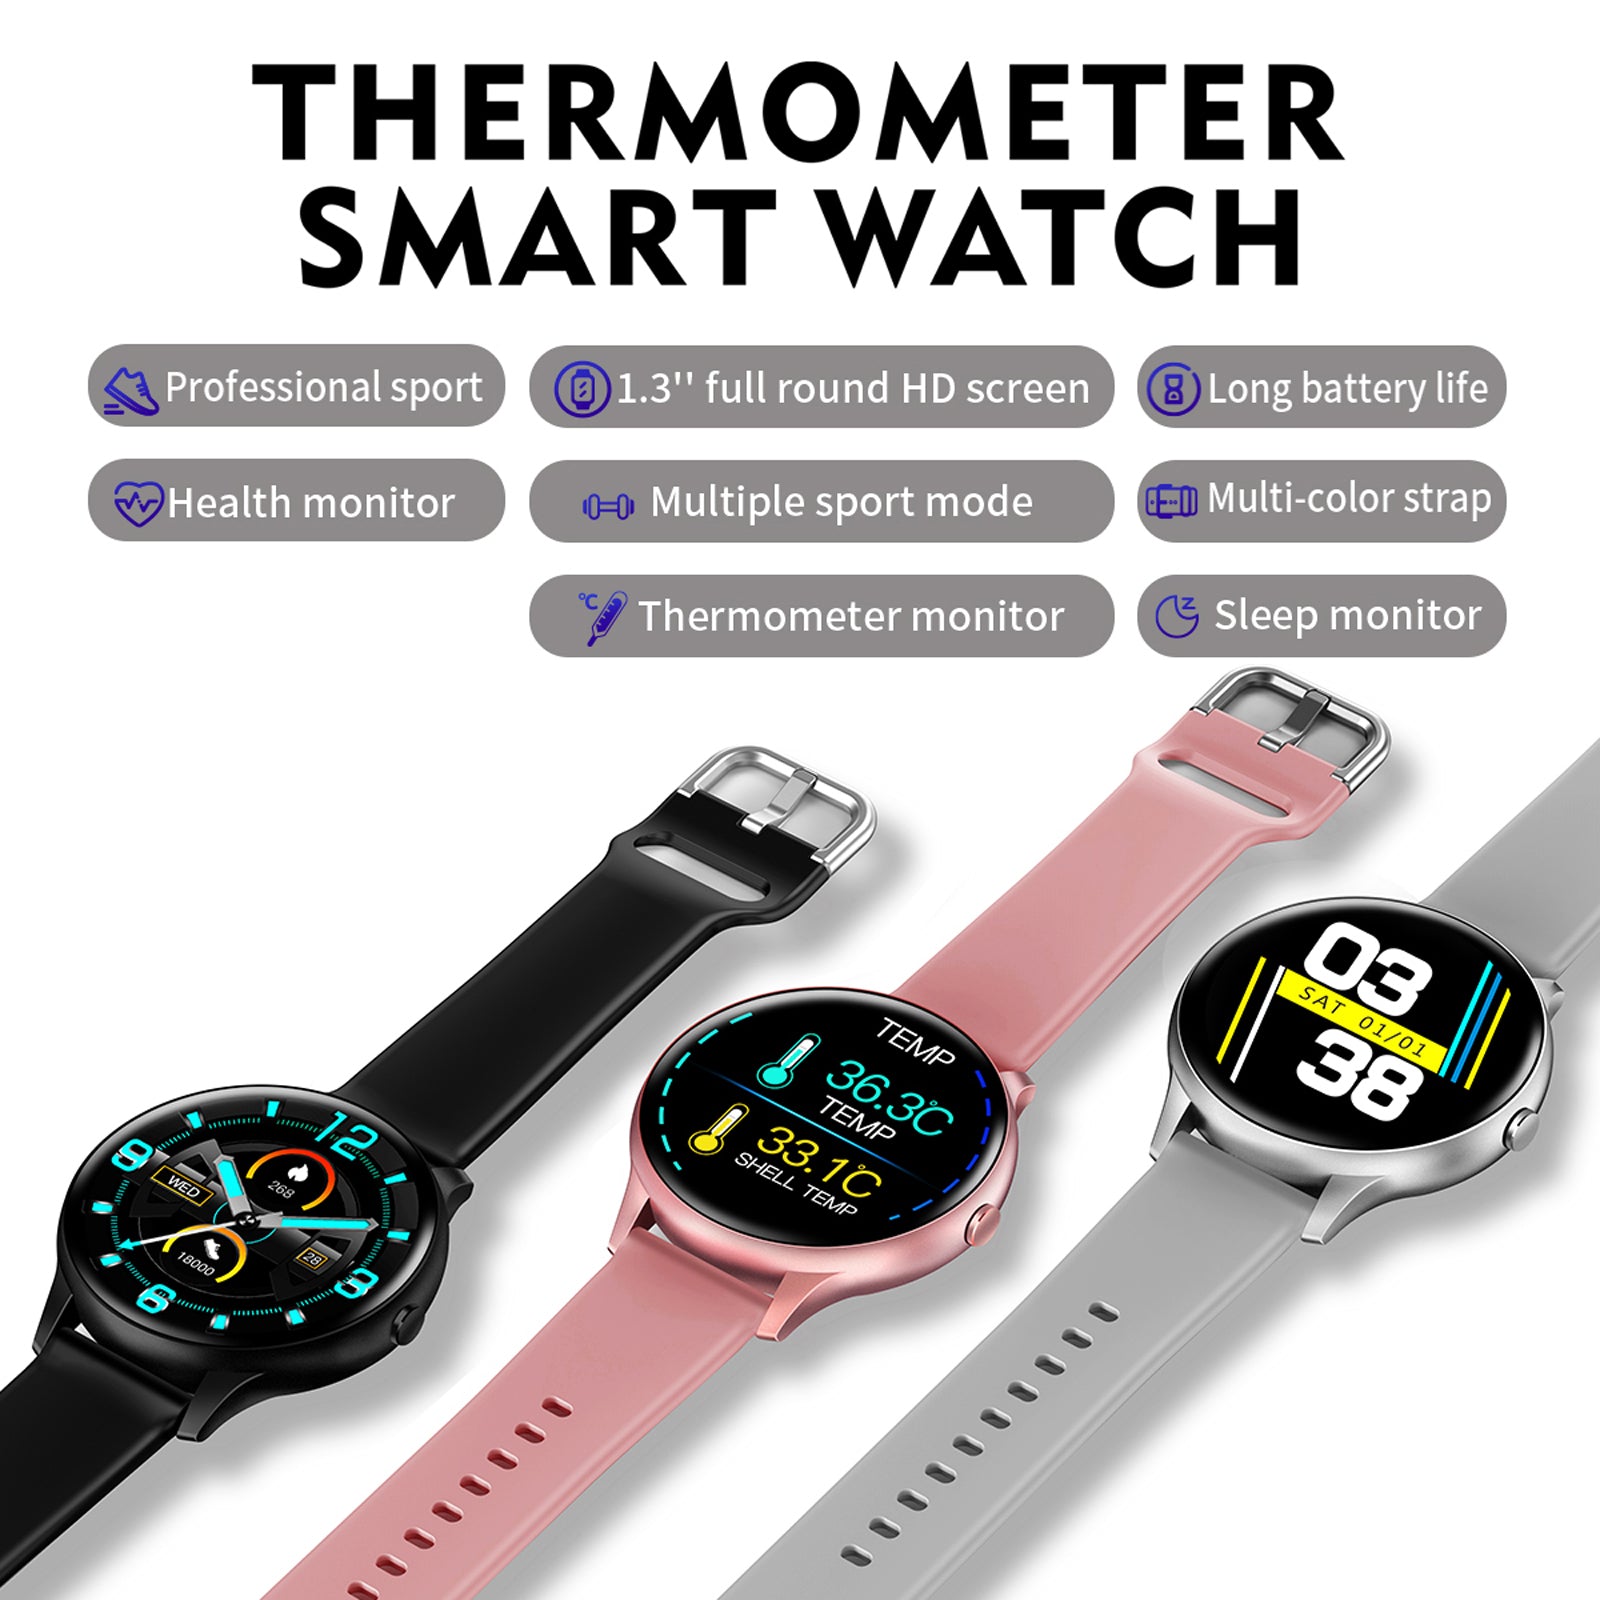 K21 Smart Watch Body Thermometer Fitness Tracker Bracelet Smart Sport Band Heart Rate Sleep Monitor Wristband Blood Pressure Test Color Screen IP67 Waterproof Message Push